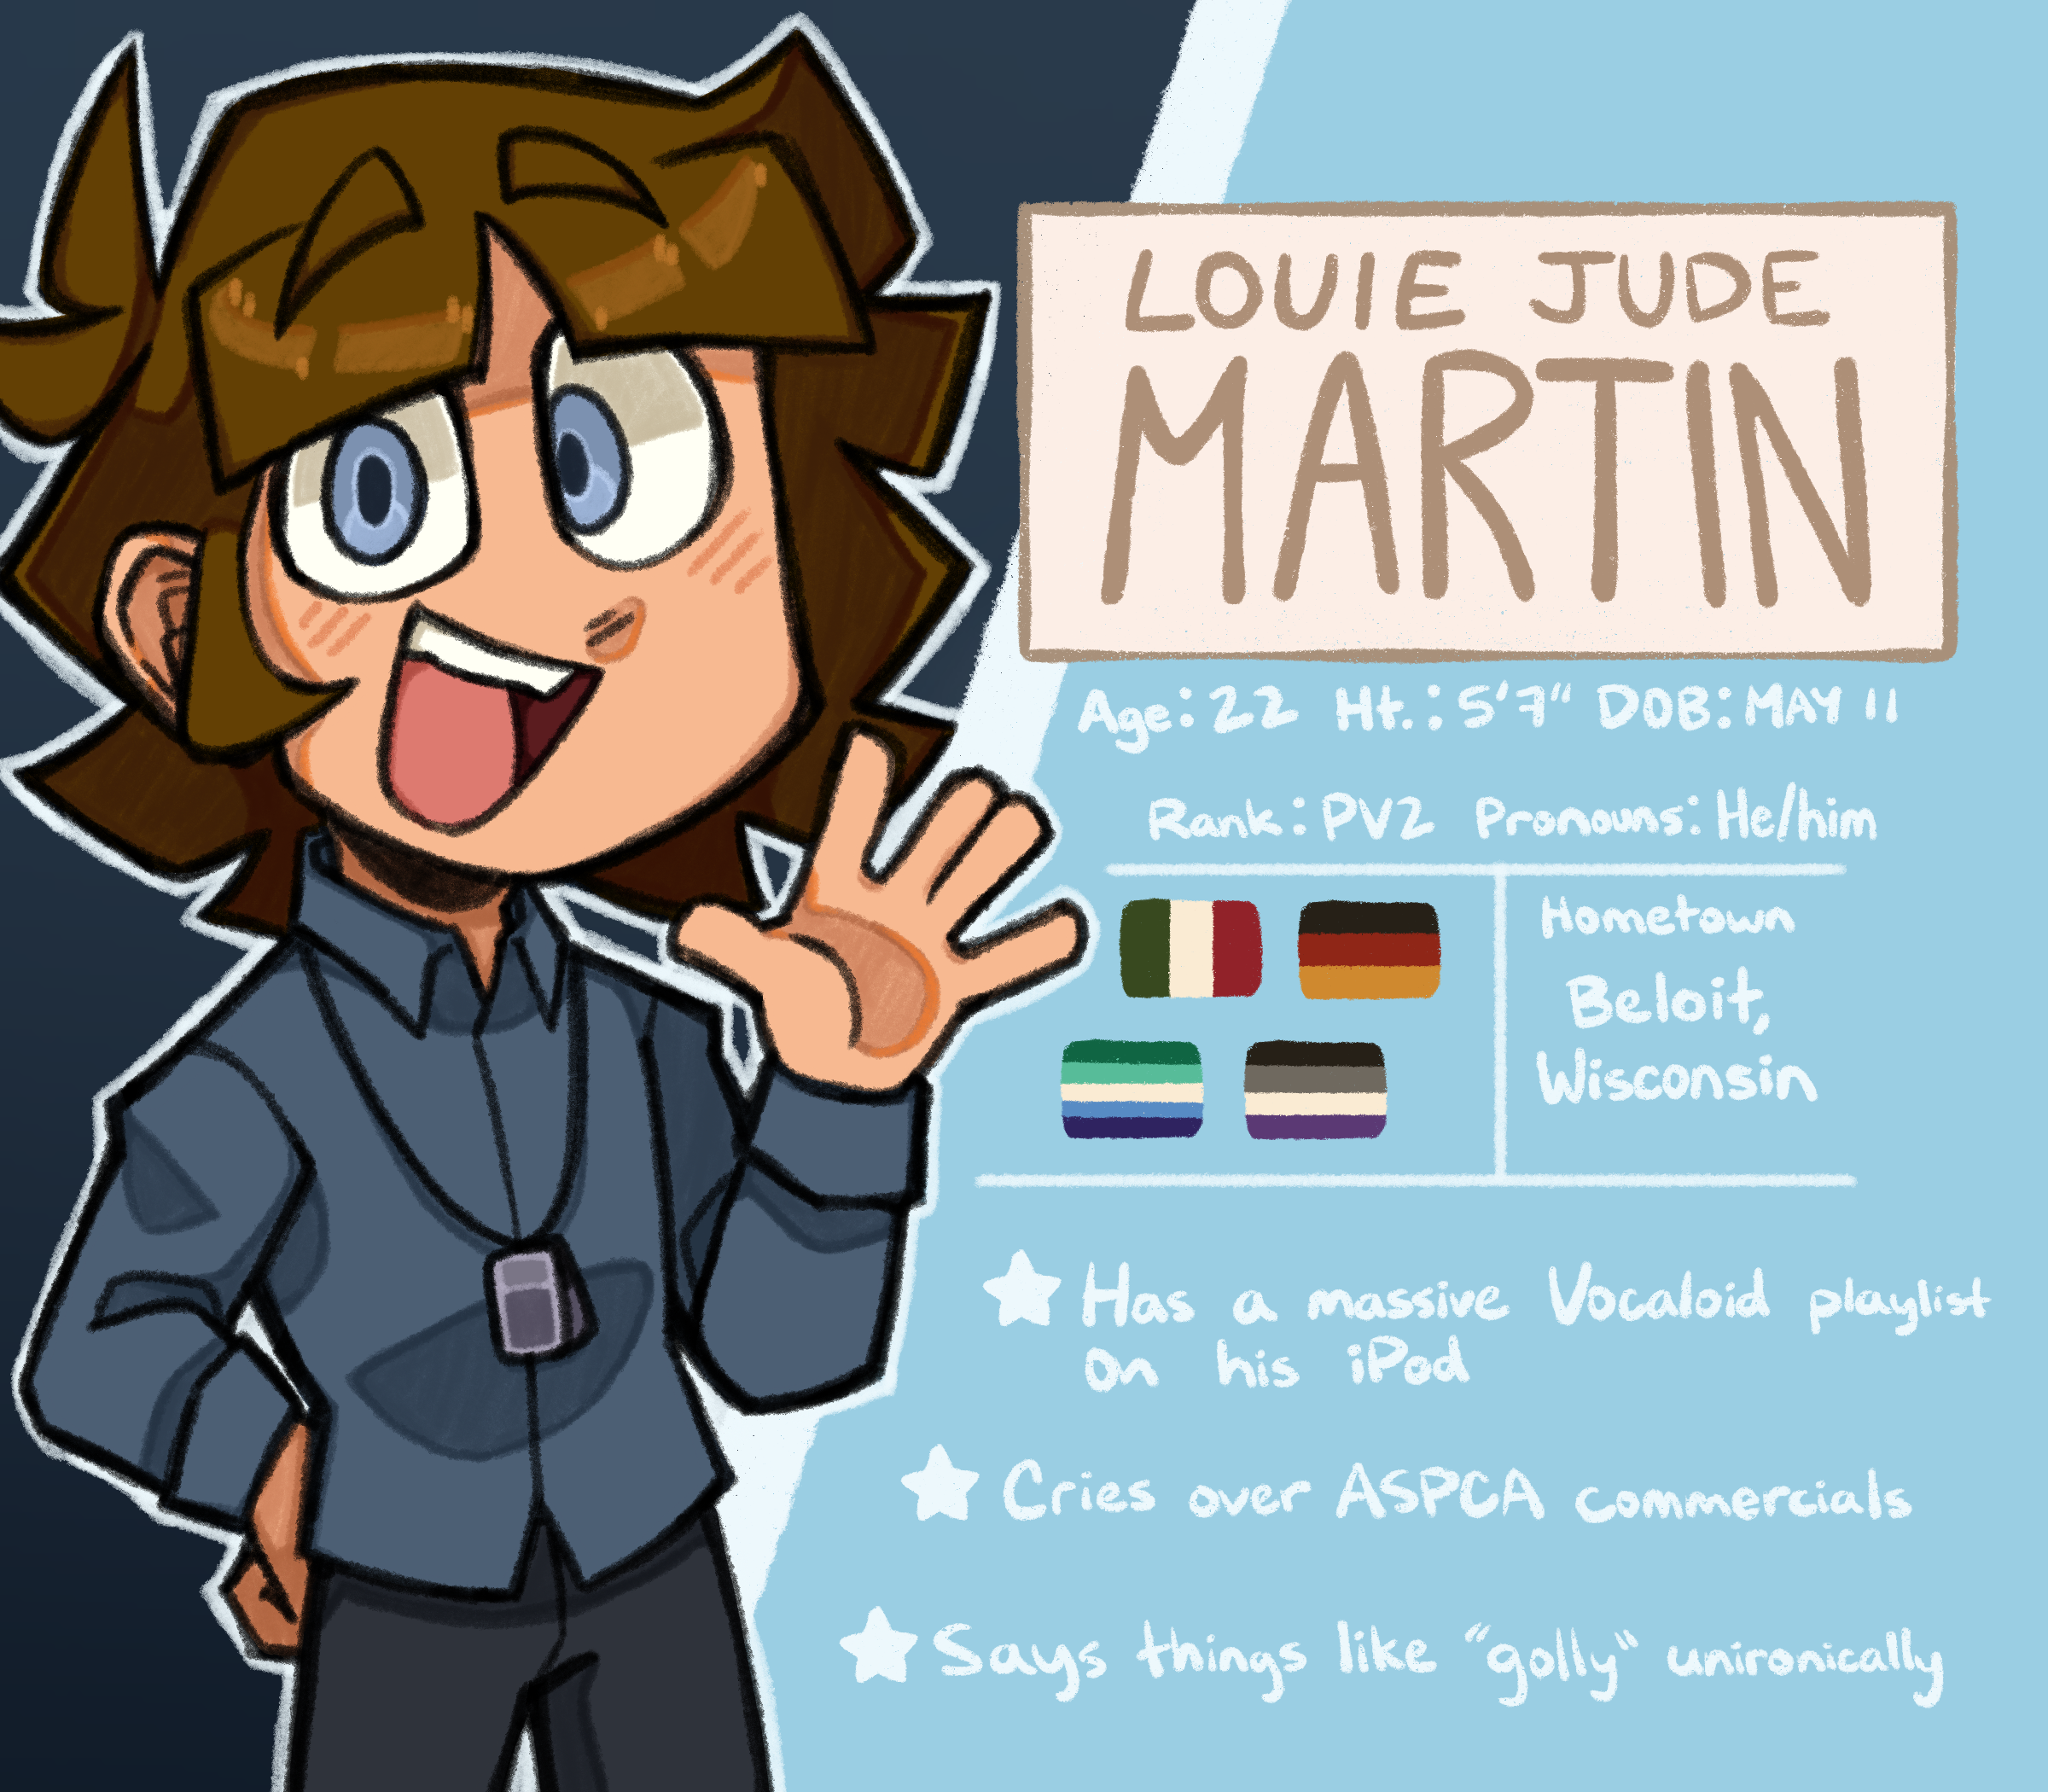 A character bio for Louie Jude Martin. Age: 22, Height: 5'7, Date of Birth: May 11. Rank: Private Second Class, Pronouns: He/him. Martin is of Italian-German descent, and identifies as cisgender, gay and asexual. His hometown is Beloit, Wisconsin. Fun facts include: he has a massive Vocaloid playlist on his iPod, he cries over ASPCA commercials, and he says things like 'golly' unironically.